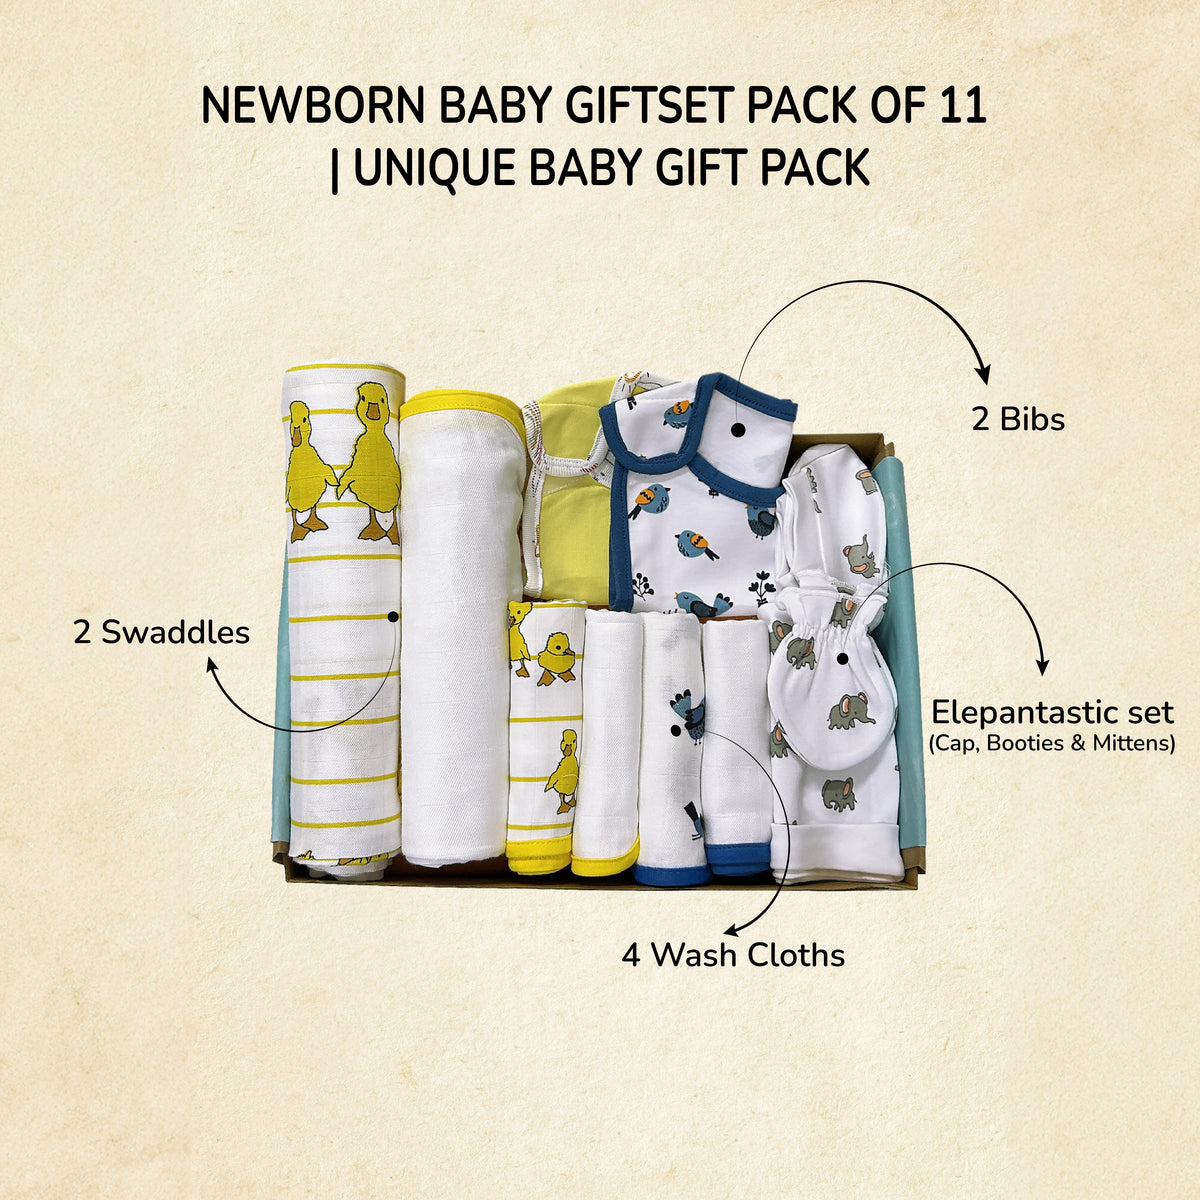 Newborn Baby Giftset Pack of 11 | Unique Baby Gift Pack